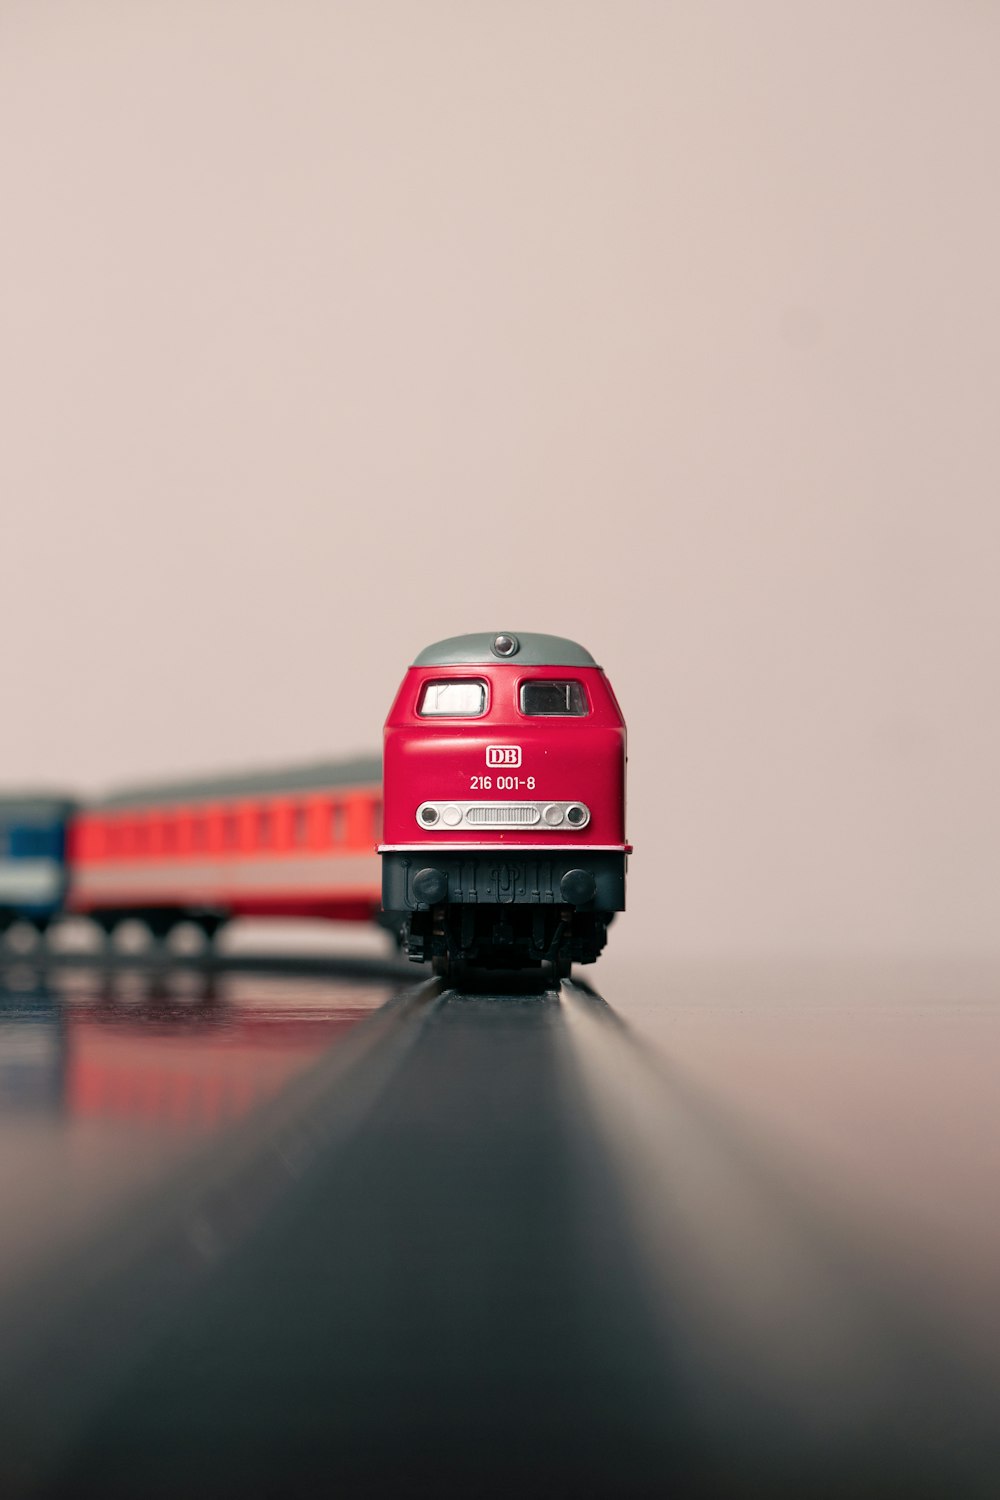 red and black train toy